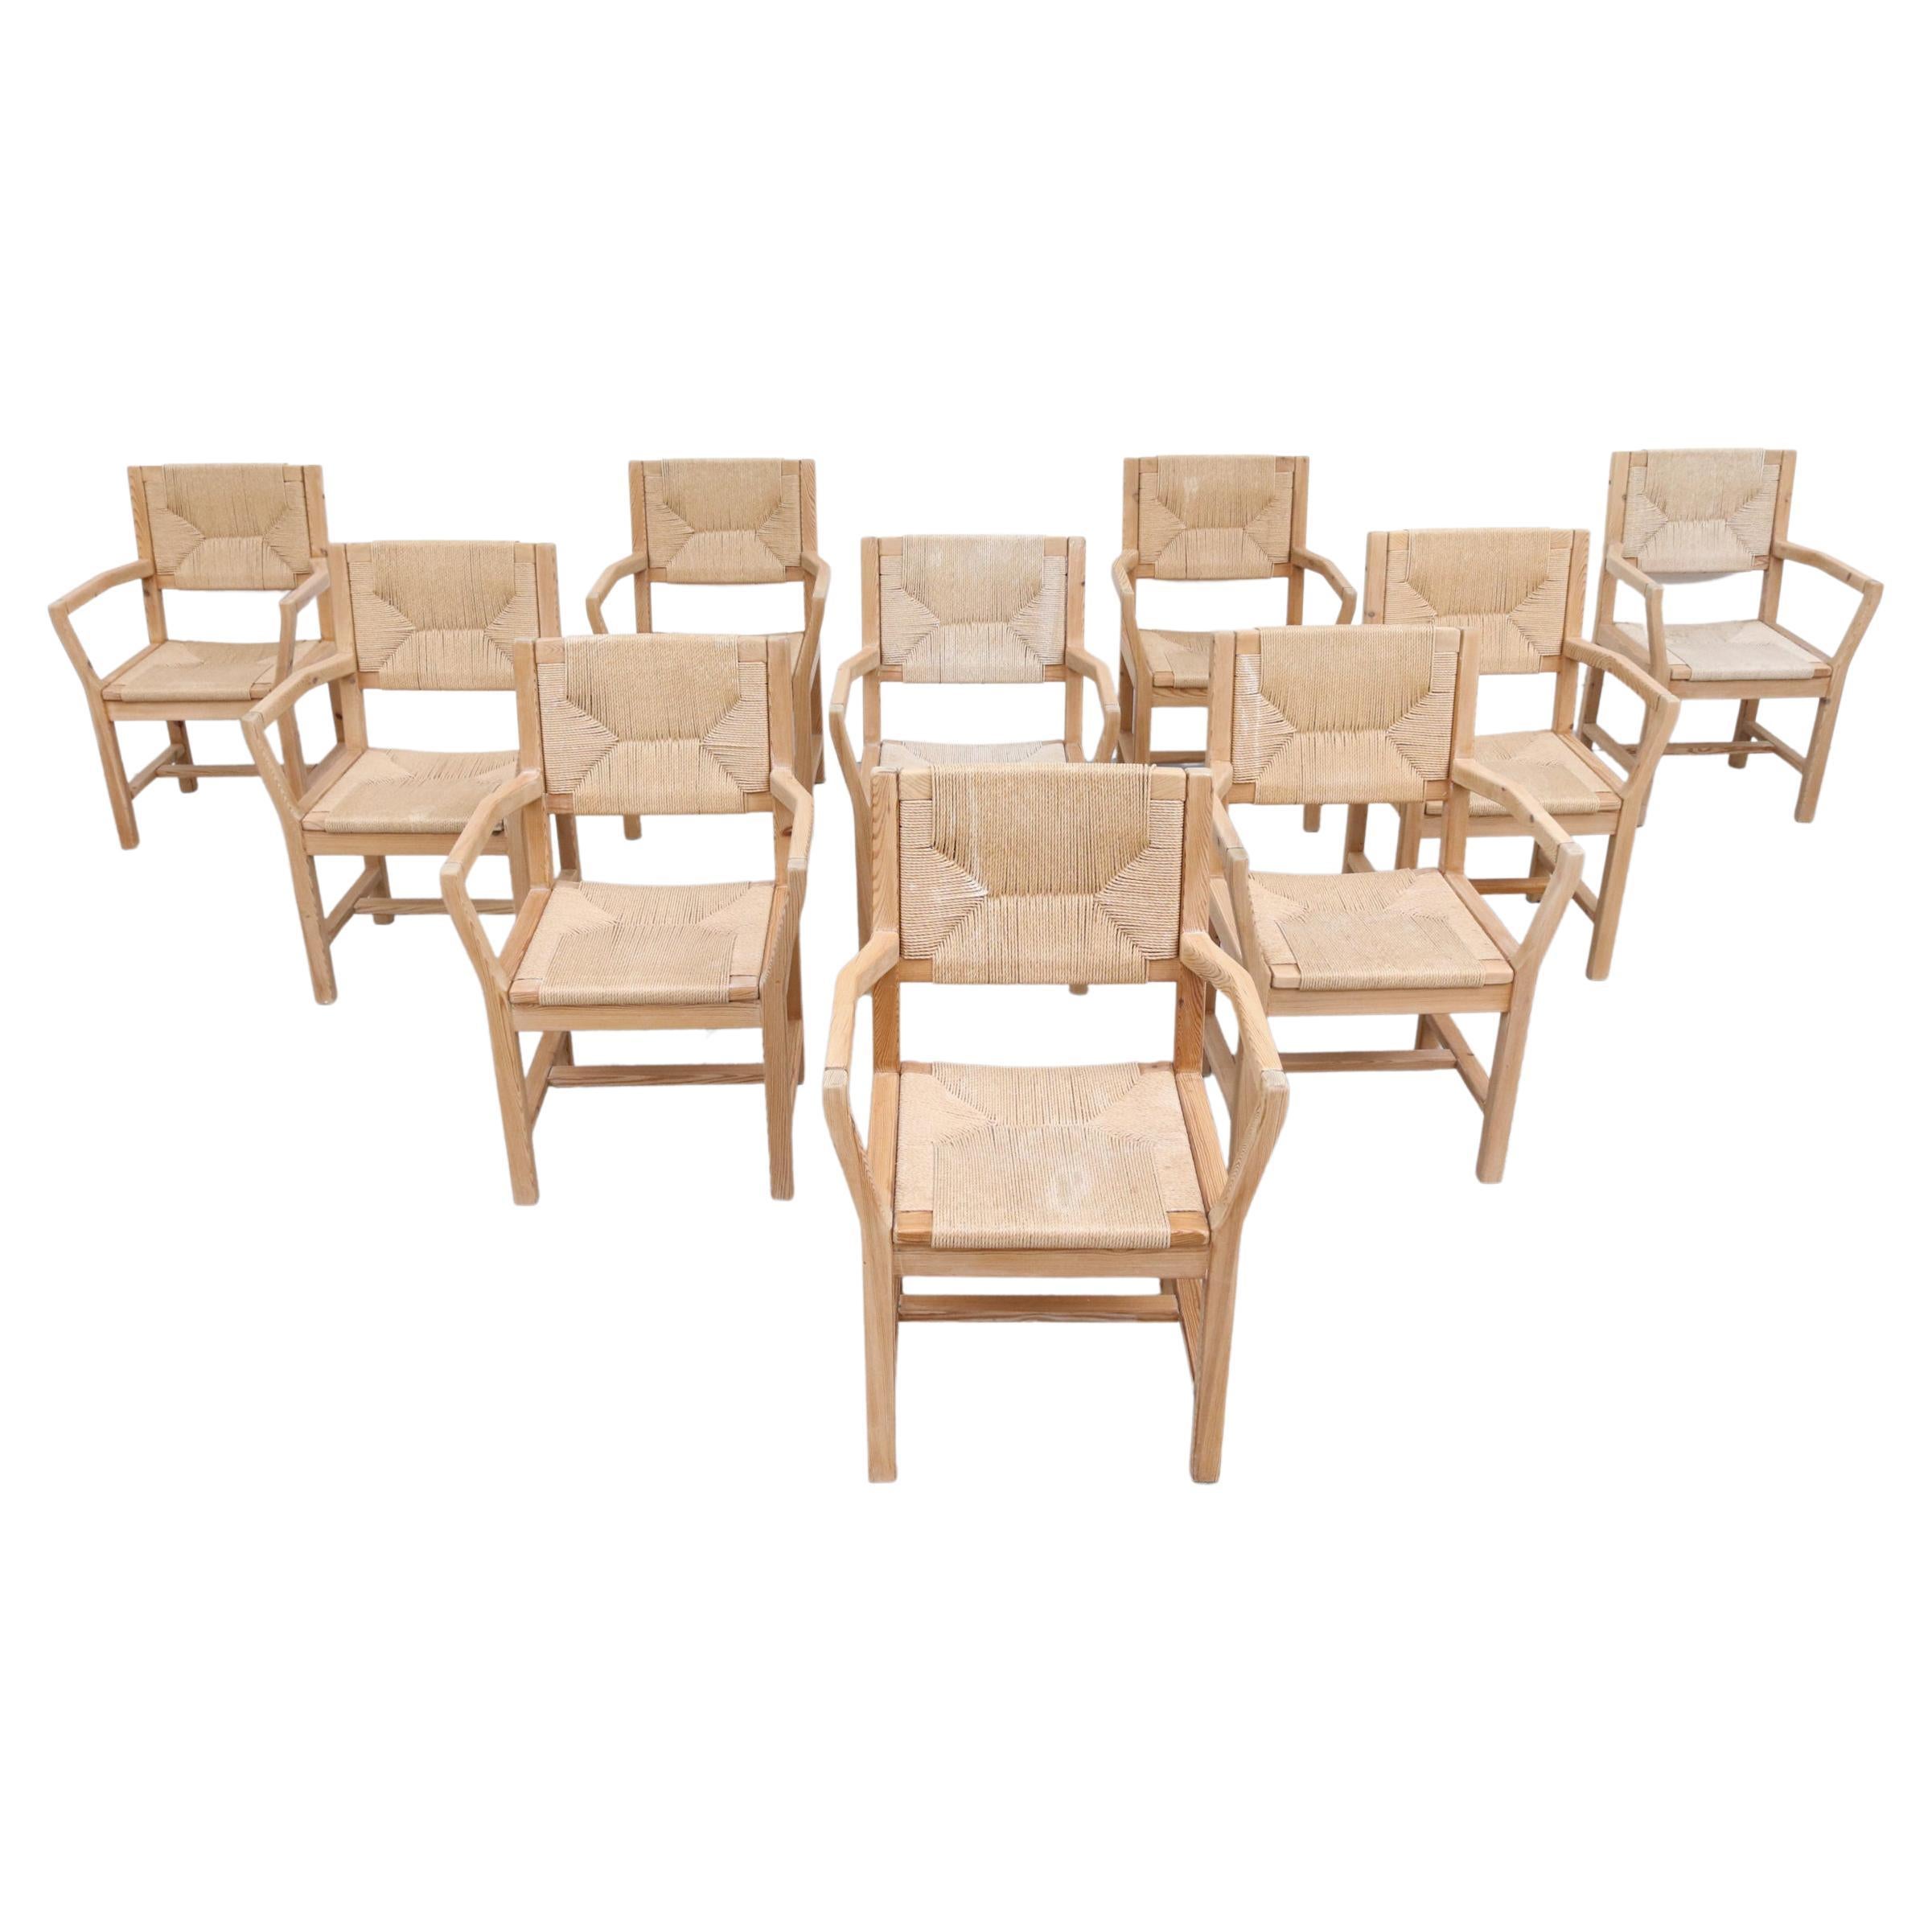 Set of 10 Danish Pine and Papercord Arm Chairs by T. Poulsen for Gm Mobler